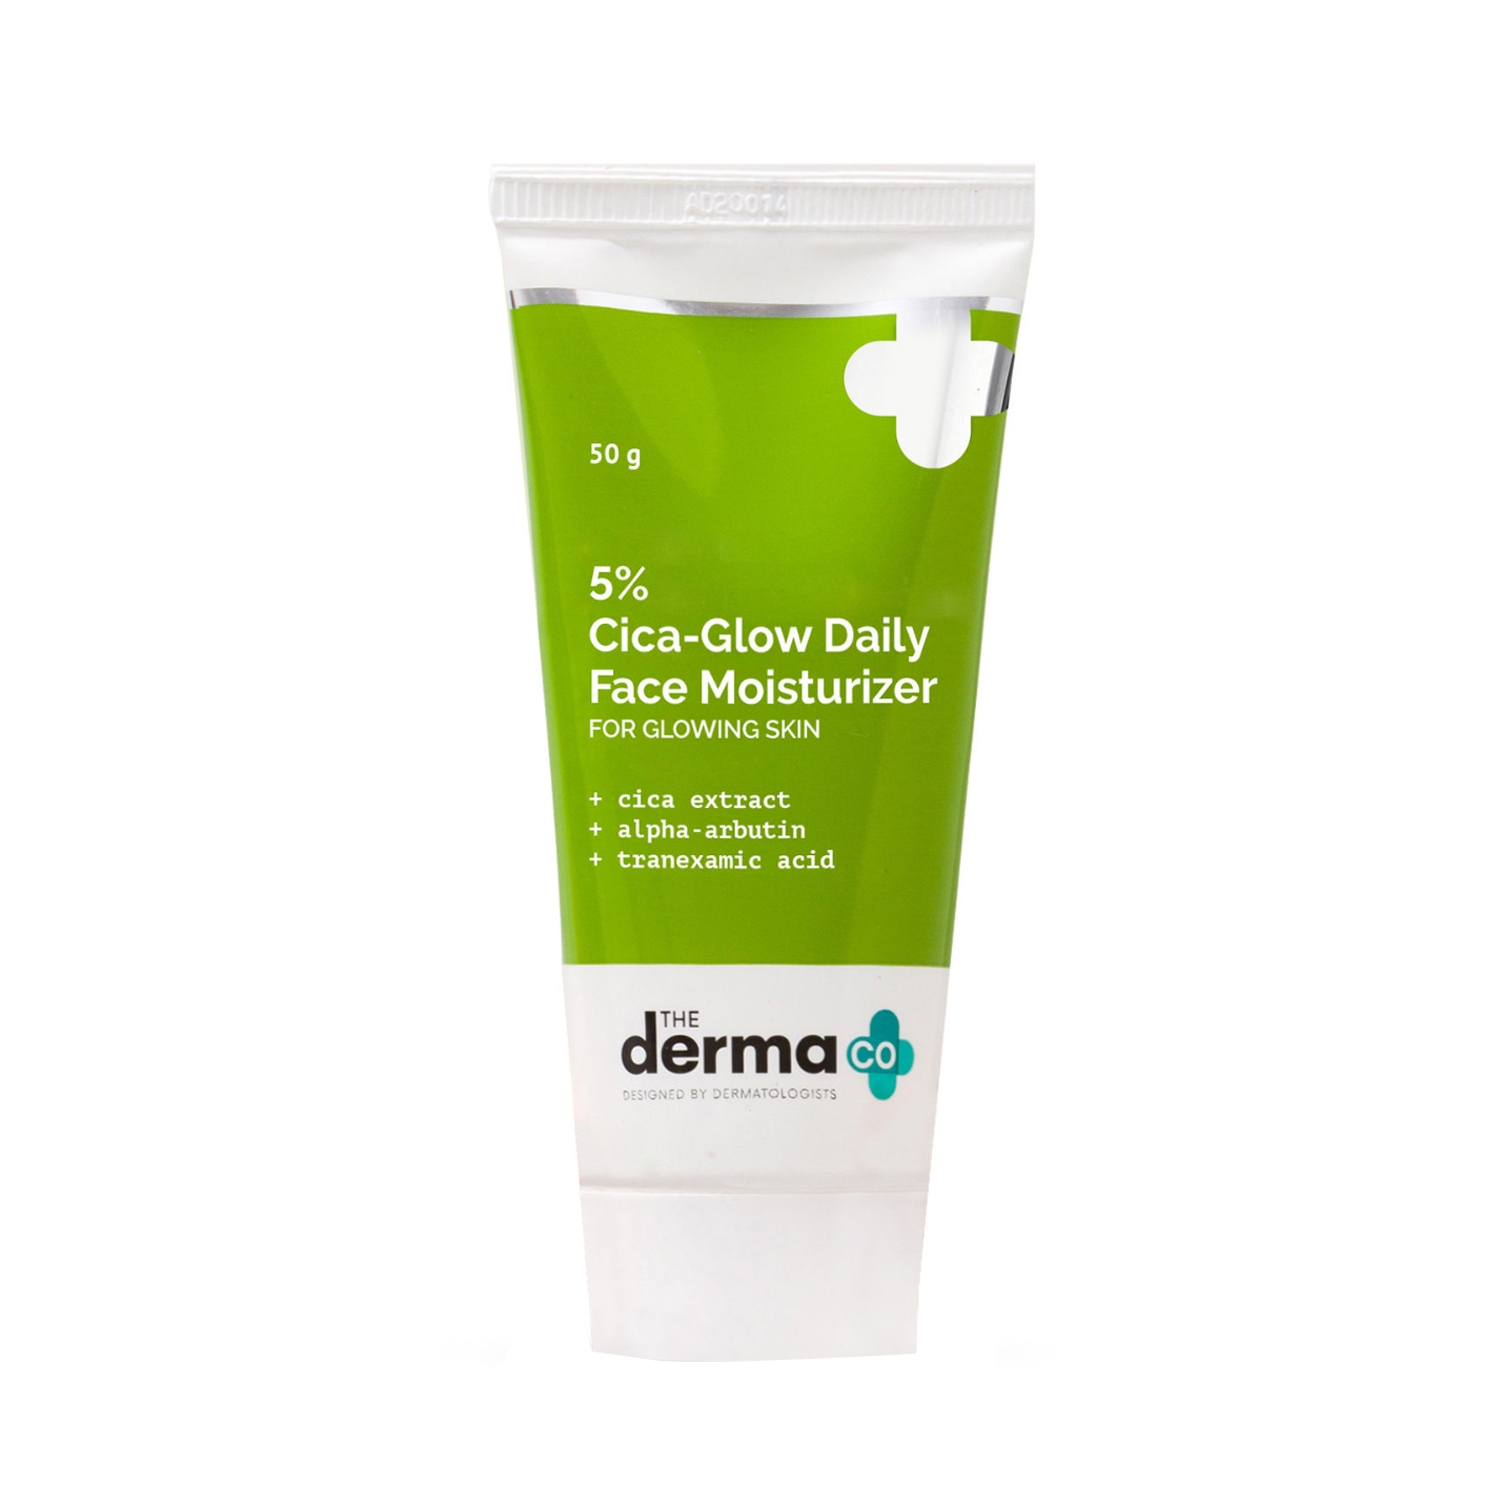 The Derma Co | The Derma Co 5% Cica-Glow Daily Face Moisturizer (50g)